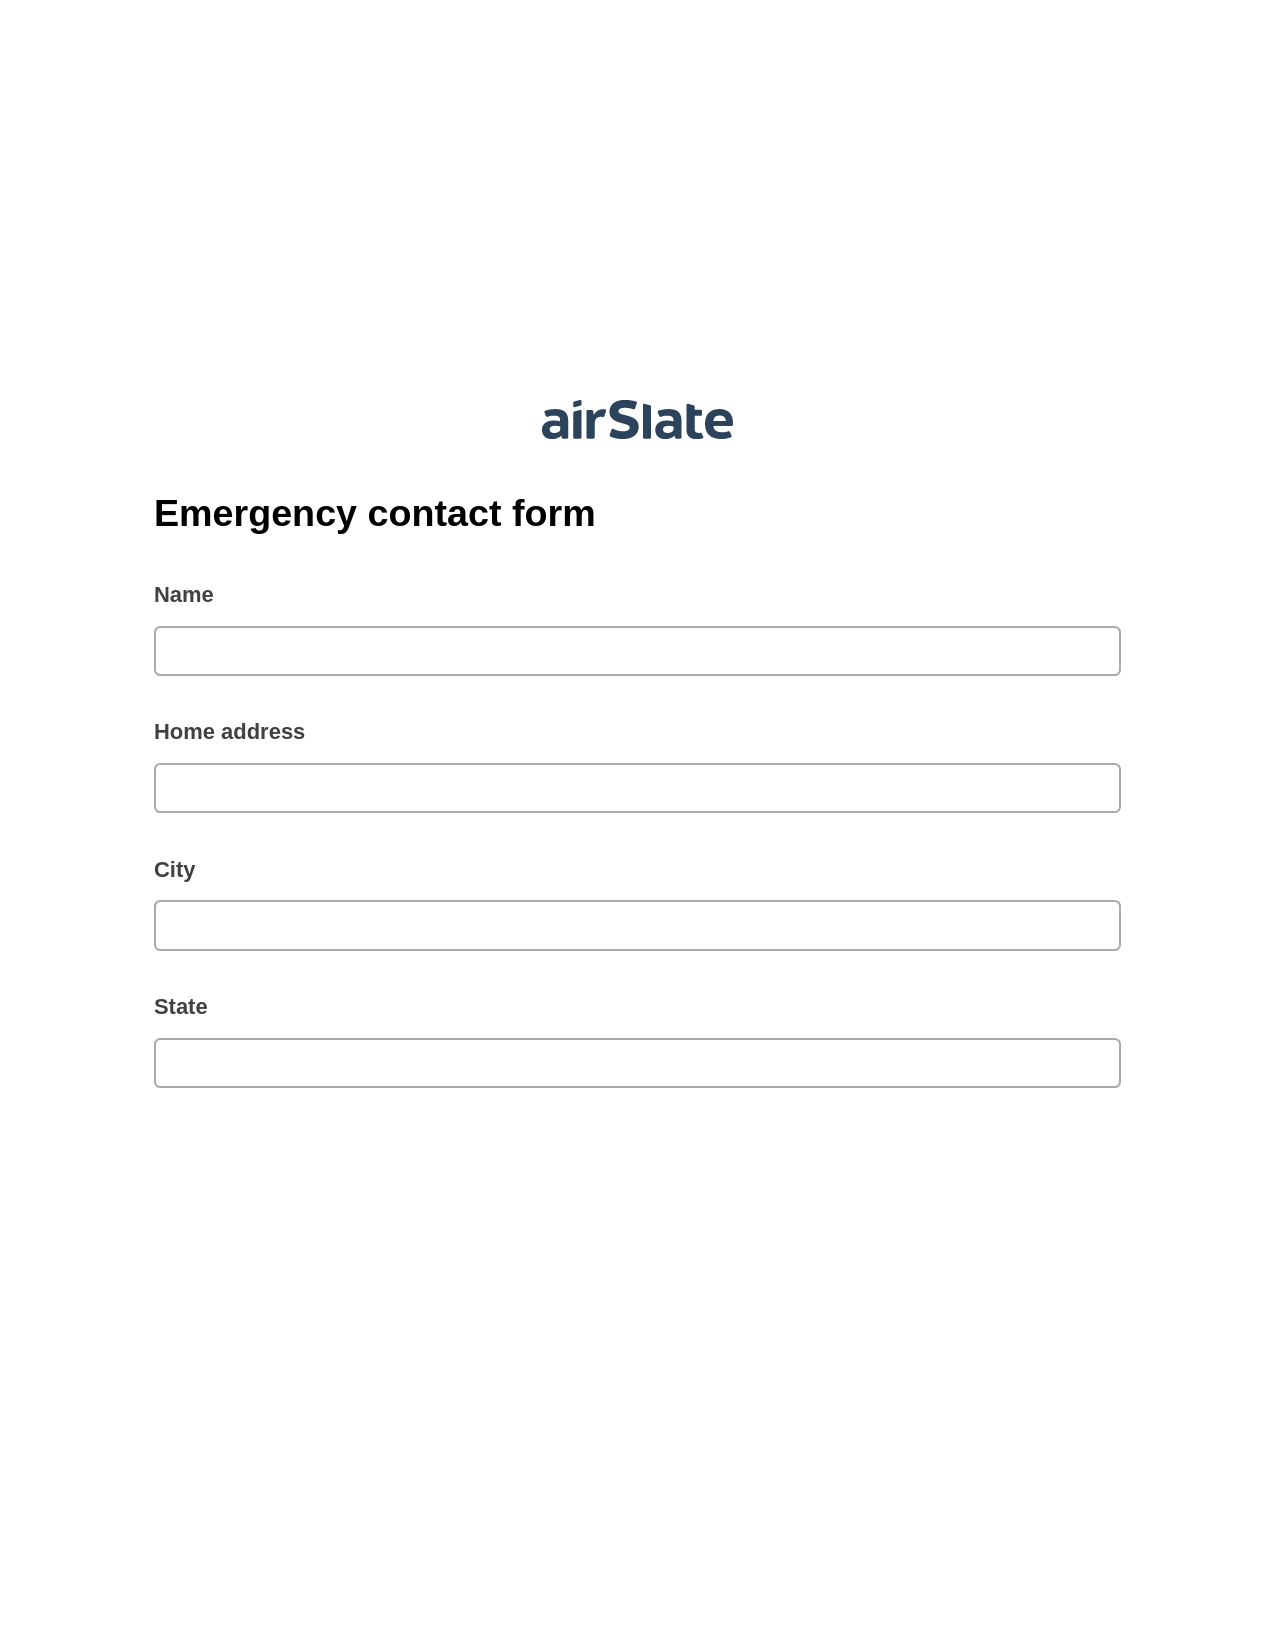 Multirole Emergency contact form Pre-fill Dropdown from Airtable, Google Sheet Two-Way Binding Bot, Export to Formstack Documents Bot